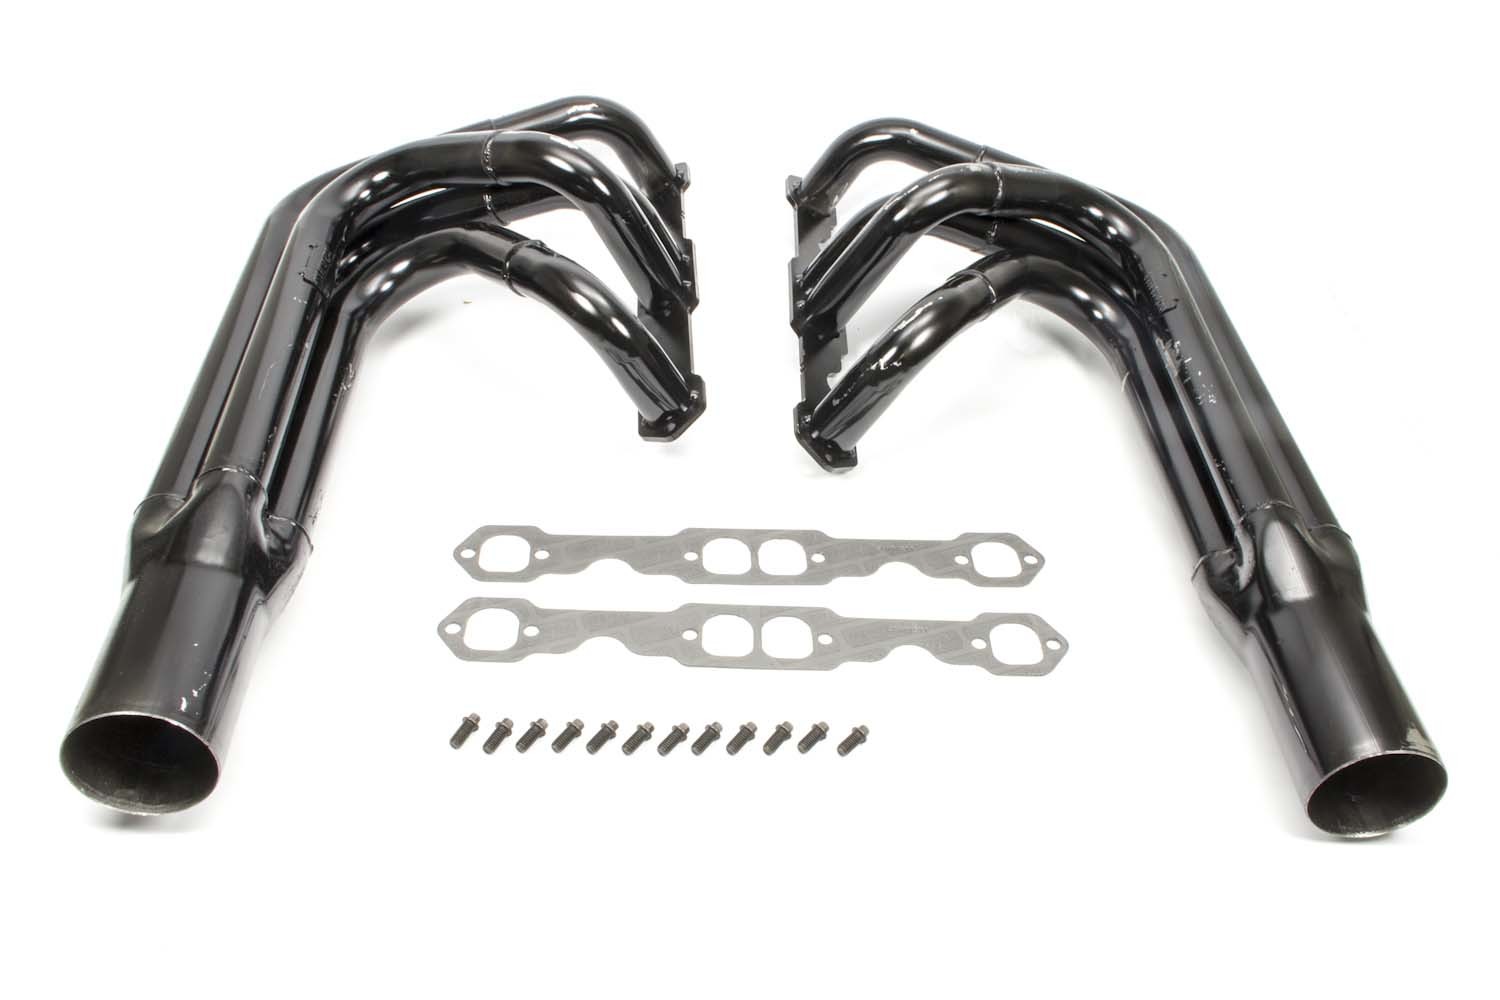 Schoenfeld Headers 1014LV Headers, Sprint, 1-3/4 to 1-7/8 in Primary, 3-1/2 in Collector, Steel, Black Paint, Small Block Chevy, Pair